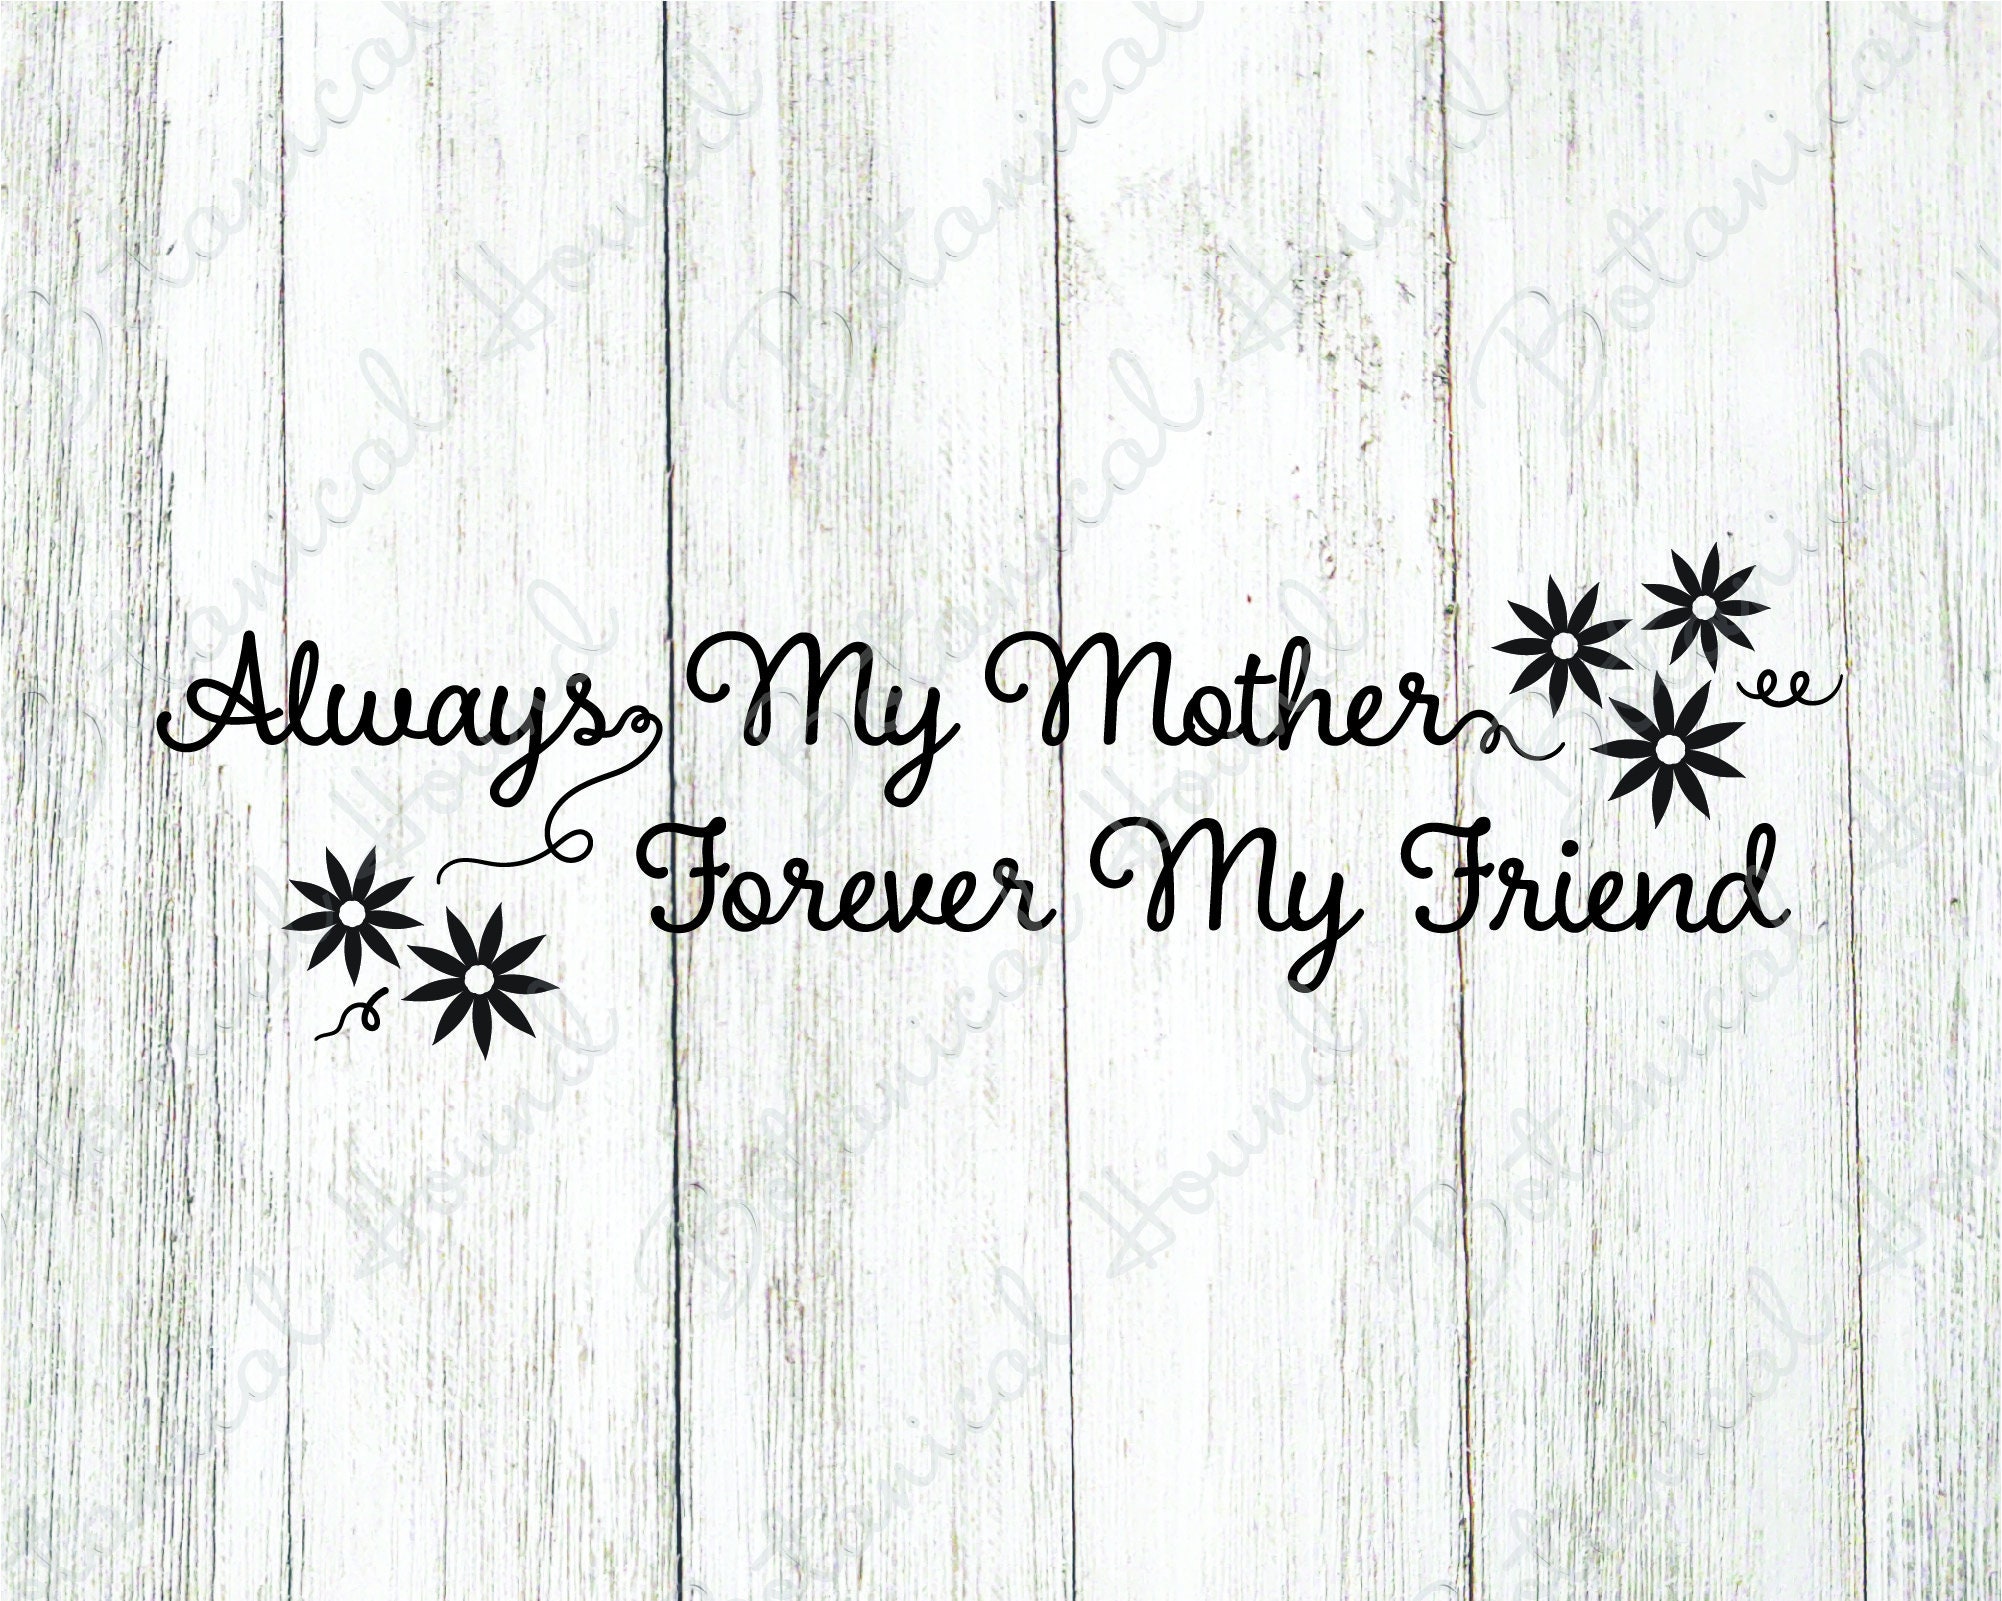 4. "Always my mother, forever my friend" tattoo design - wide 3